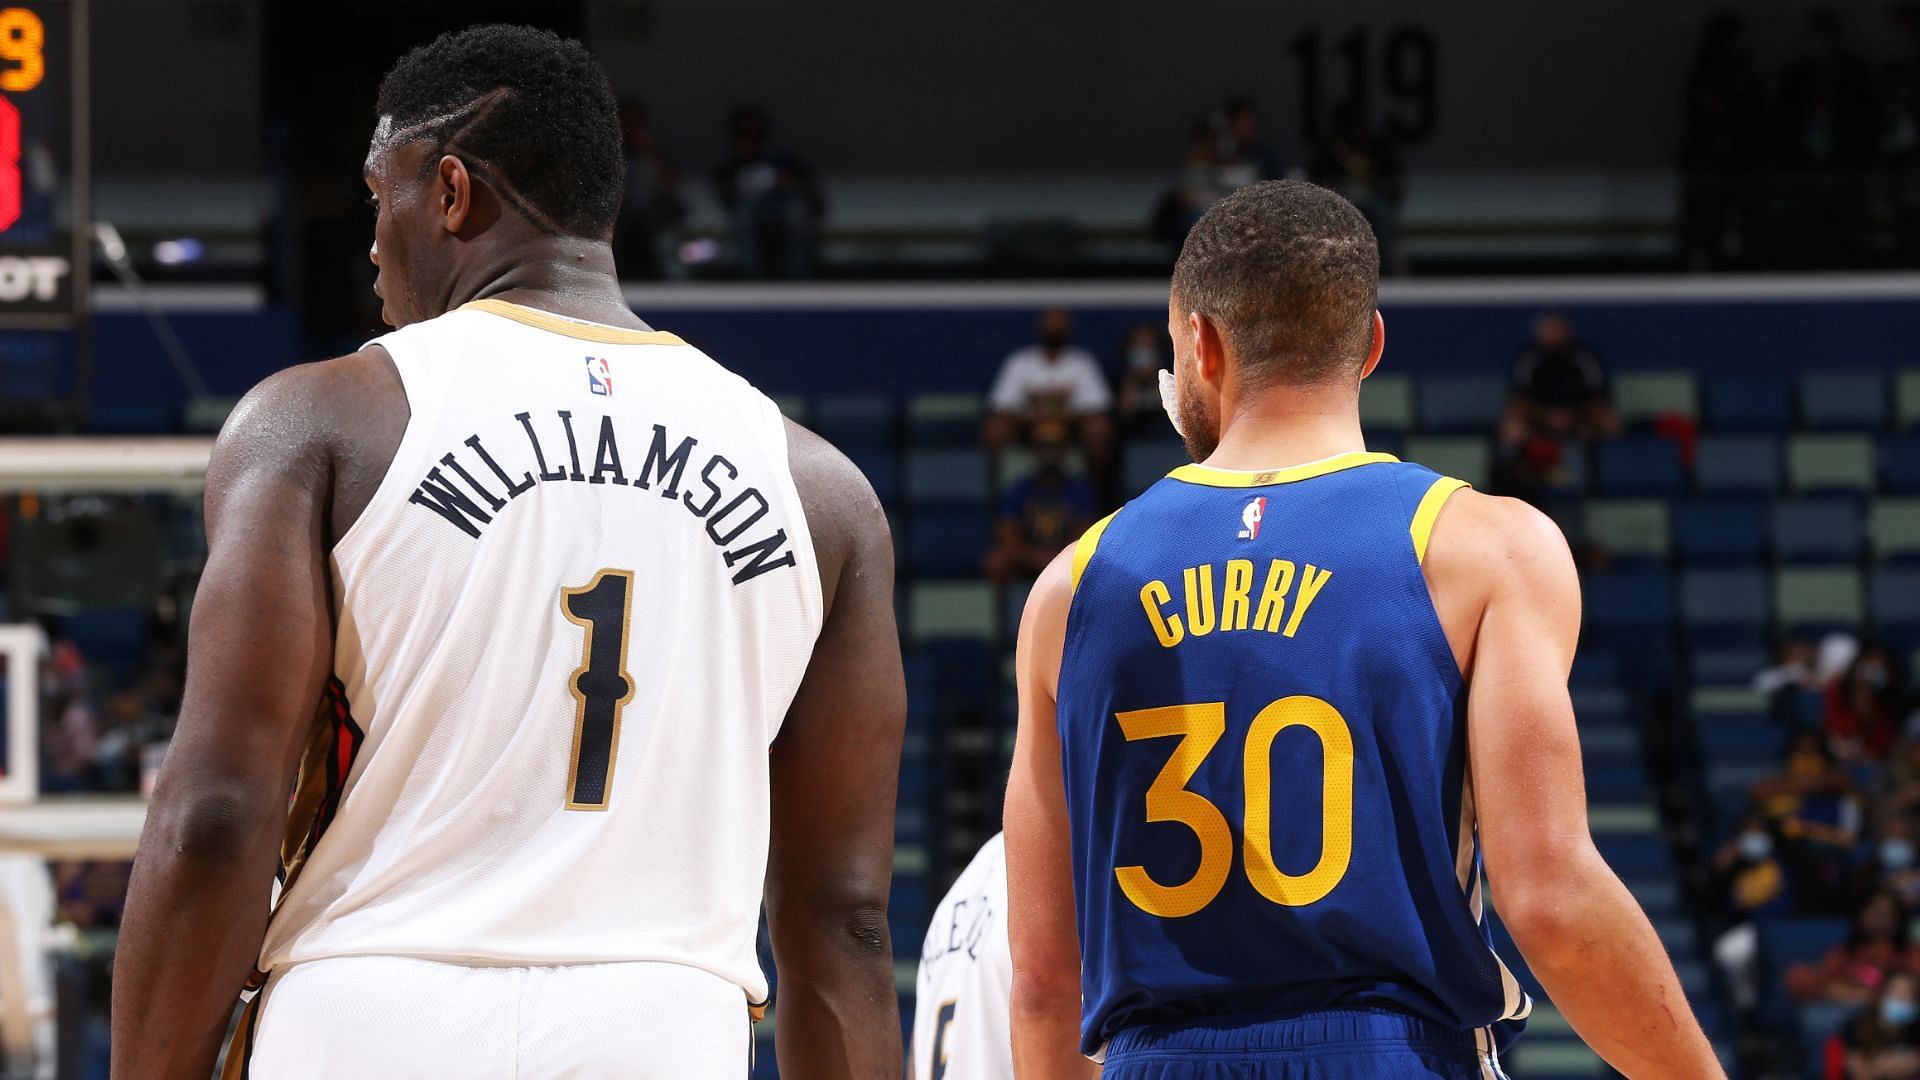 Zion Williamson of the New Orleans Pelicans against Stephen Curry of the Golden State Warriors